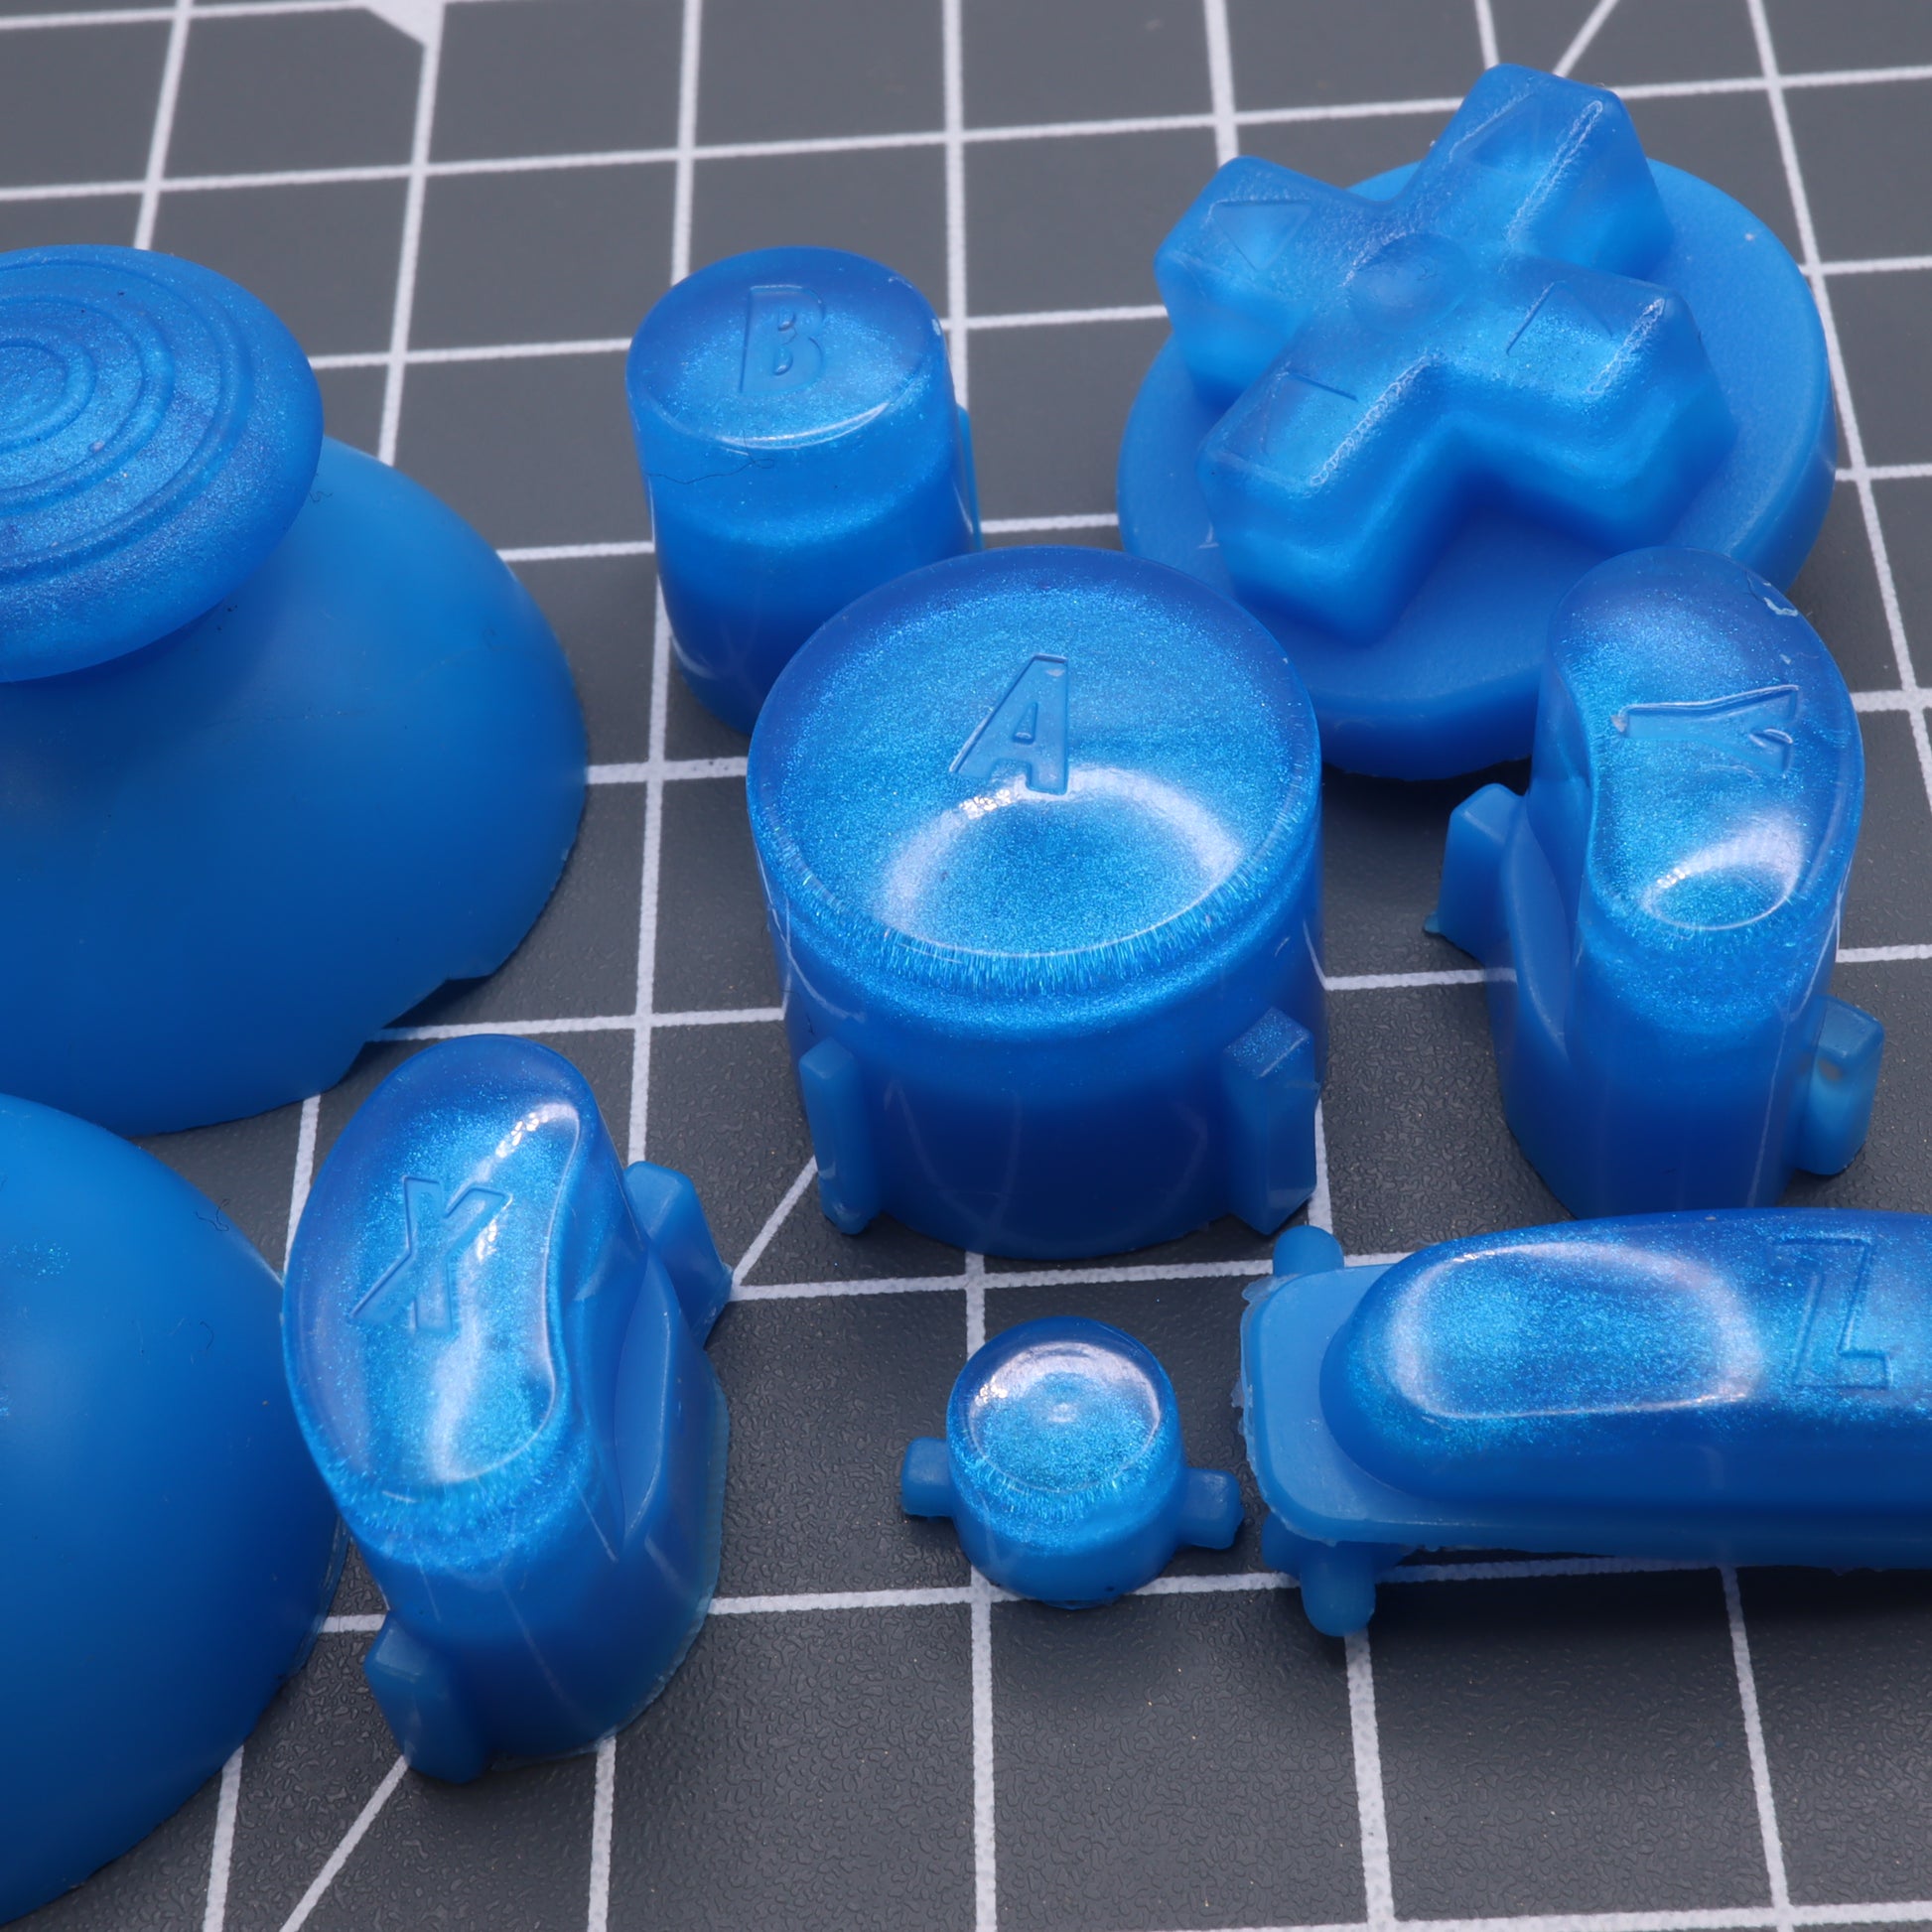 Blue GameCube - Custom Button - Blueberry Candy with various shapes on a grid surface.